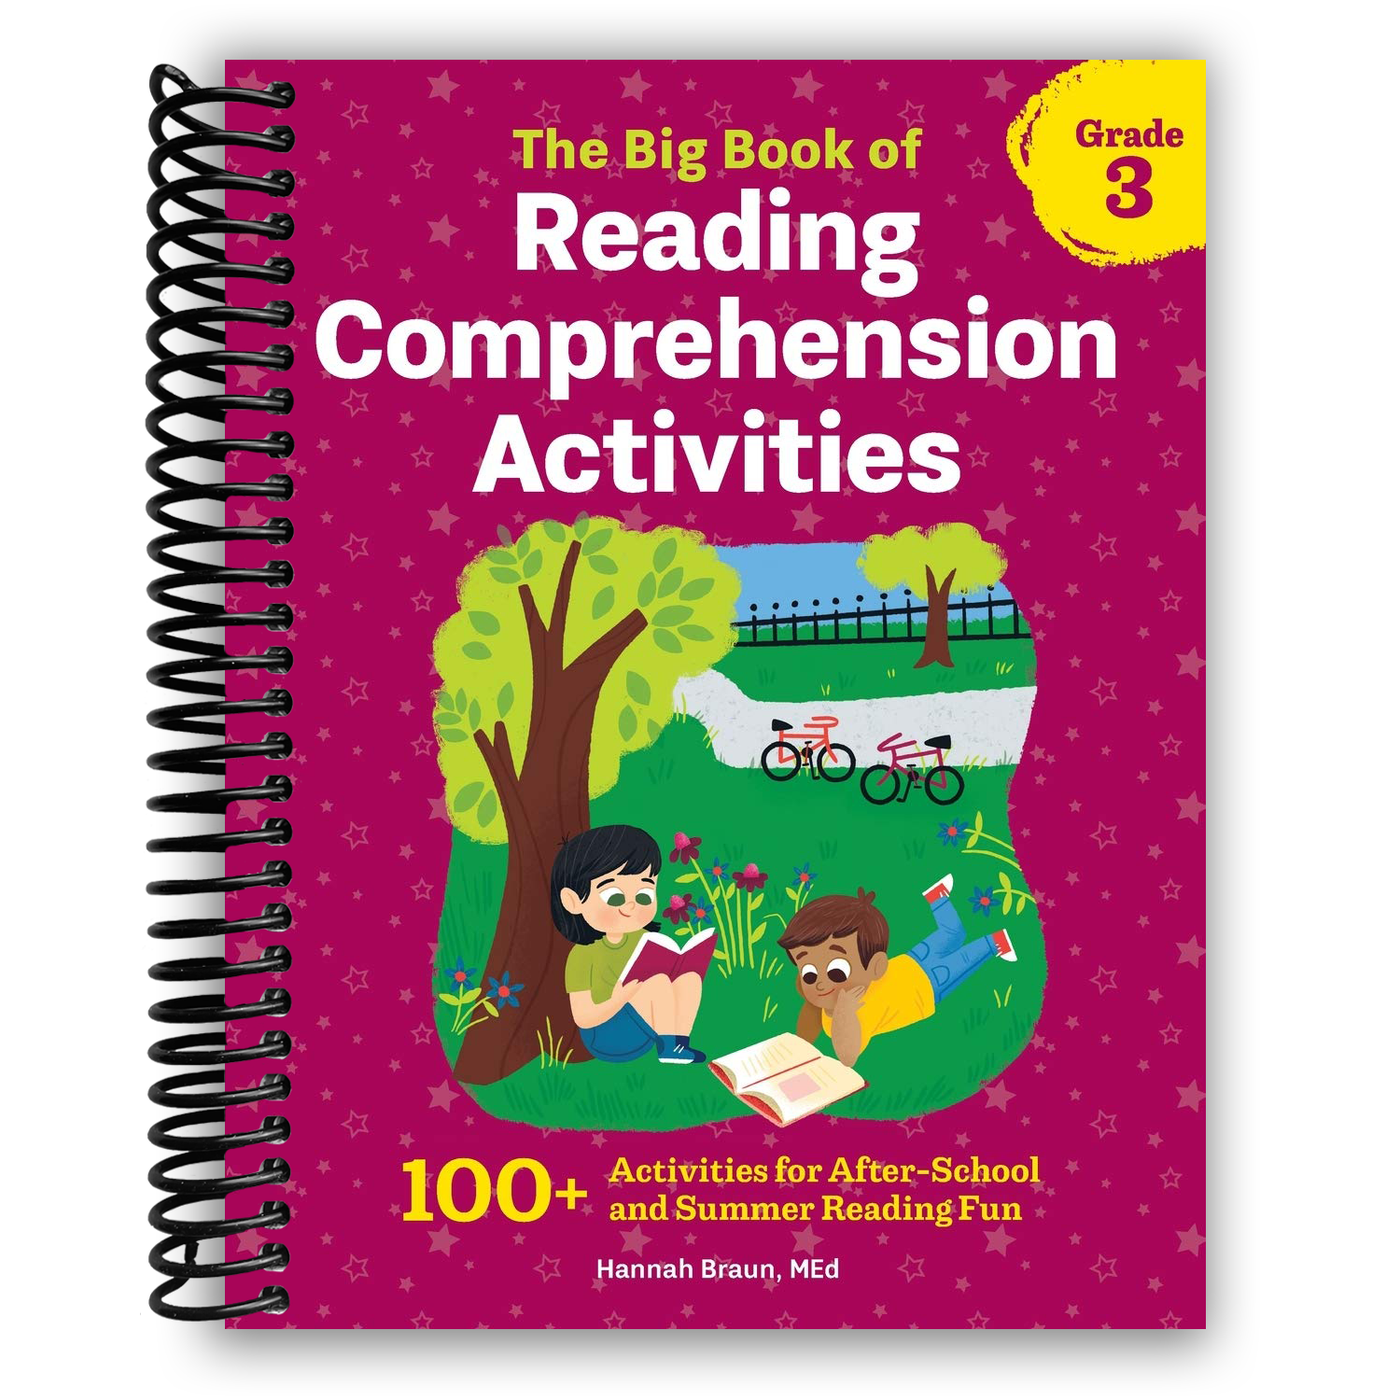 The Big Book of Reading Comprehension Activities, Grade 3: 100+ Activities for After-School and Summer Reading Fun(Spiral Bound)